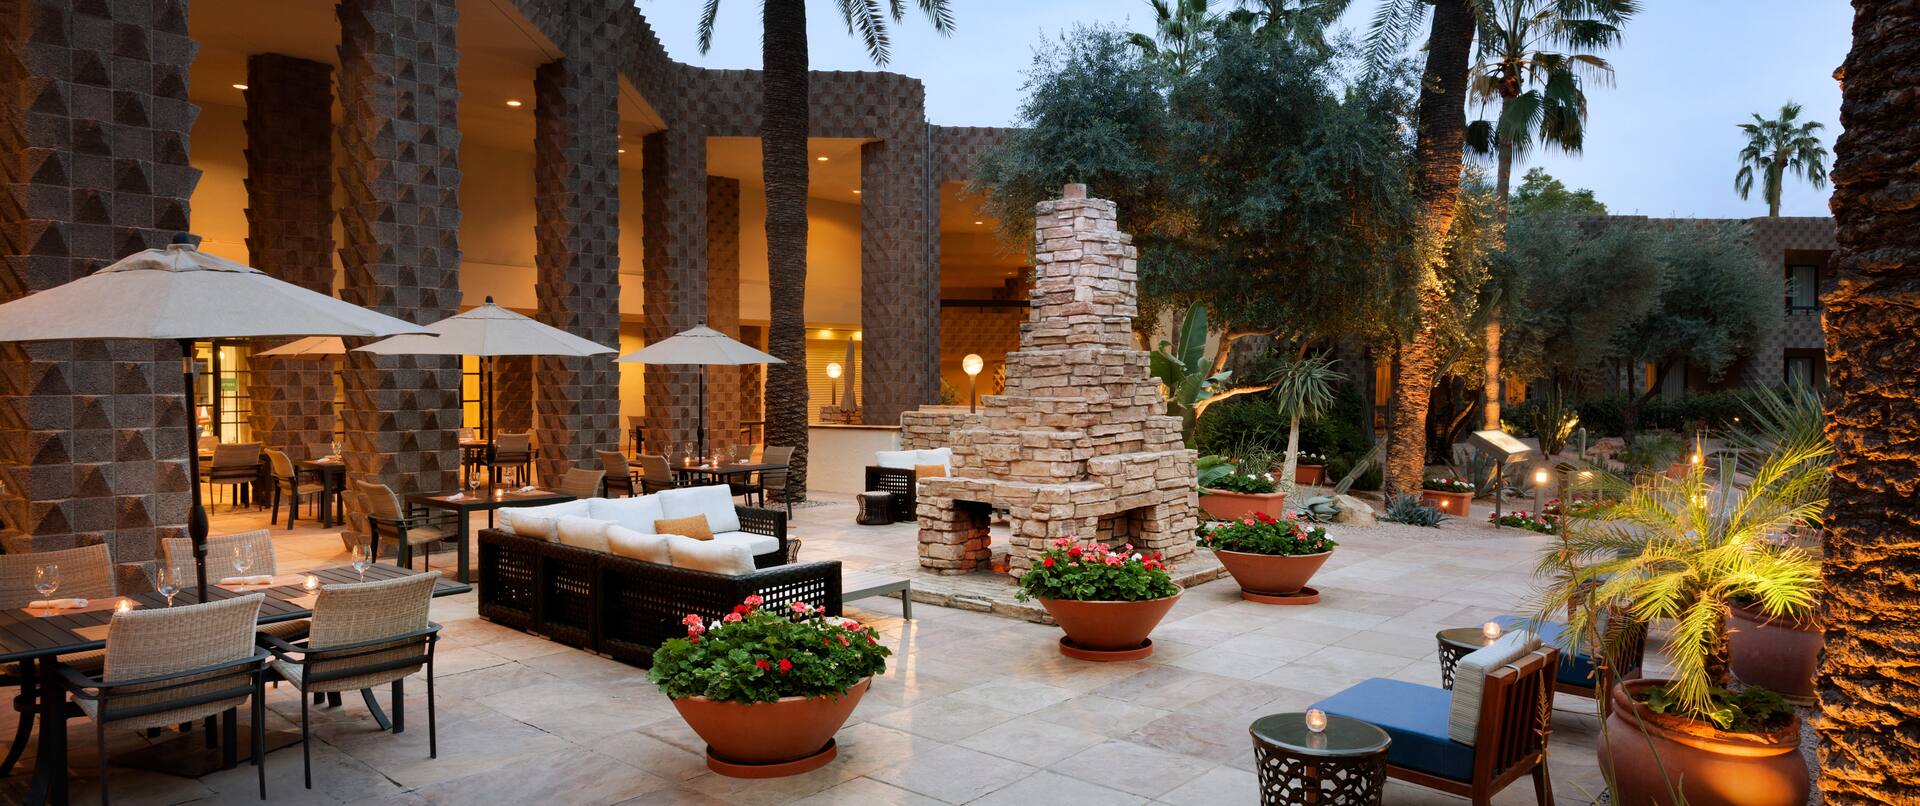 Tables With Umbrellas, Soft Seating, Furnace, and Candlelit Tables on Outdoor Patio Surrounded by Palm Trees at Dusk